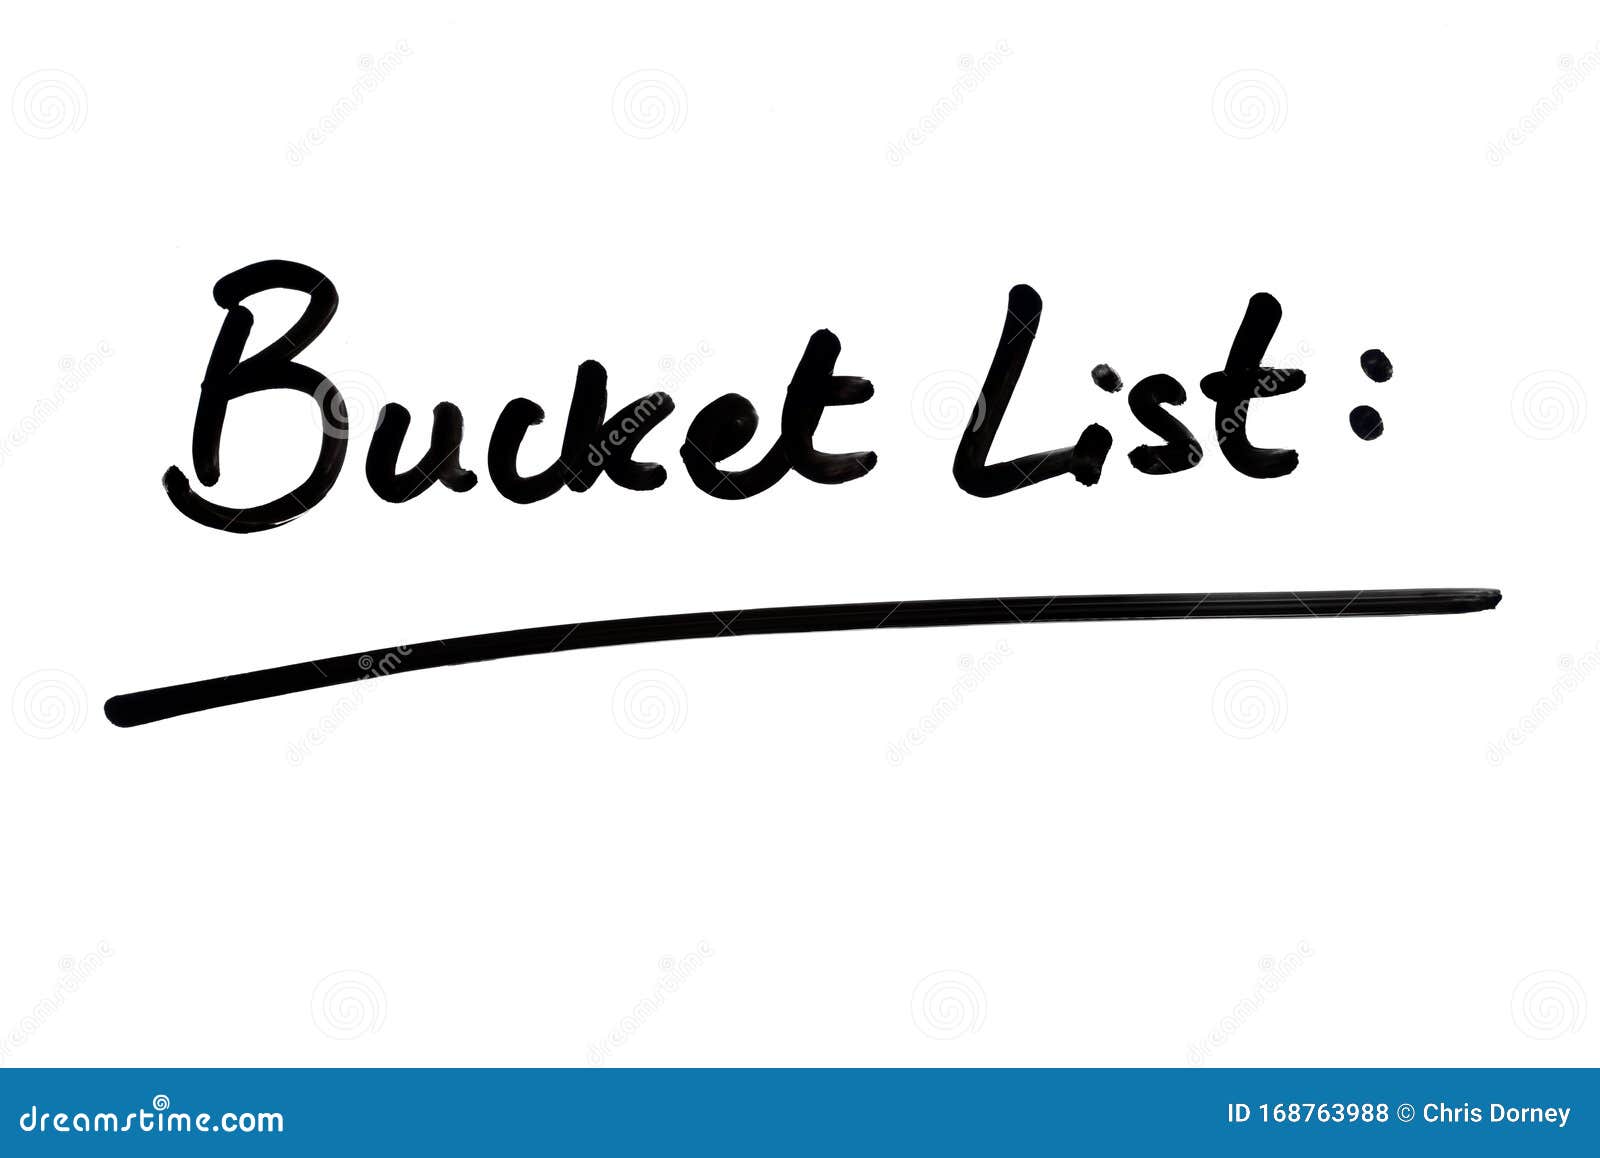 80+ Kick Bucket Stock Photos, Pictures & Royalty-Free Images